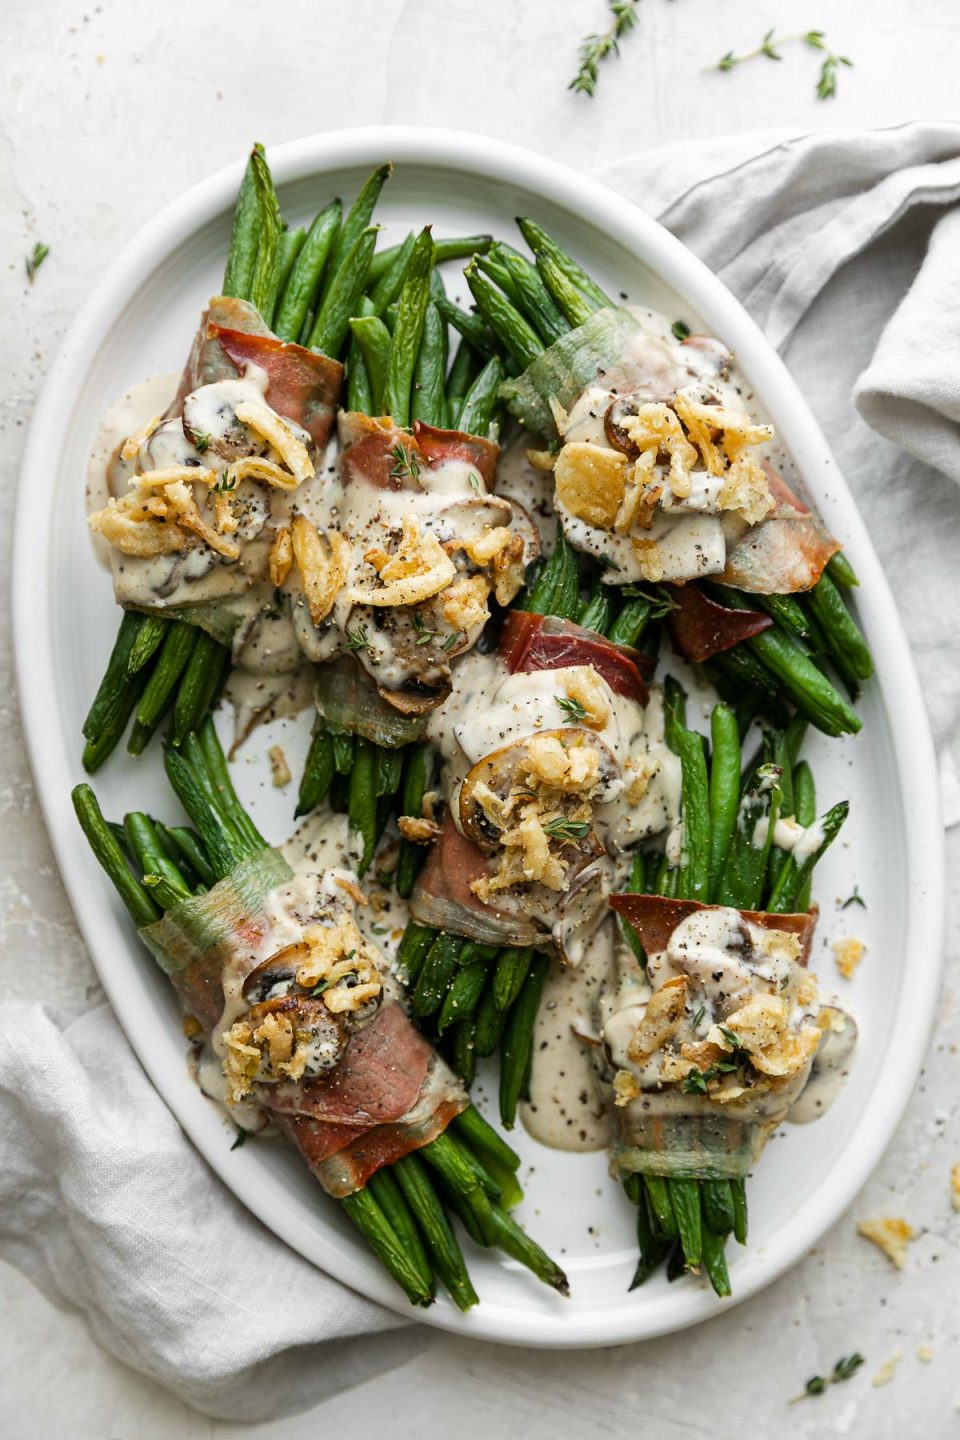 Prosciutto-wrapped green bean bundles arranged on a white serving platter and topped with creamy mushroom sauce and french fried onions. The serving platter sits atop a creamy white plaster surface and light gray linen napkin is tucked underneath the platter.